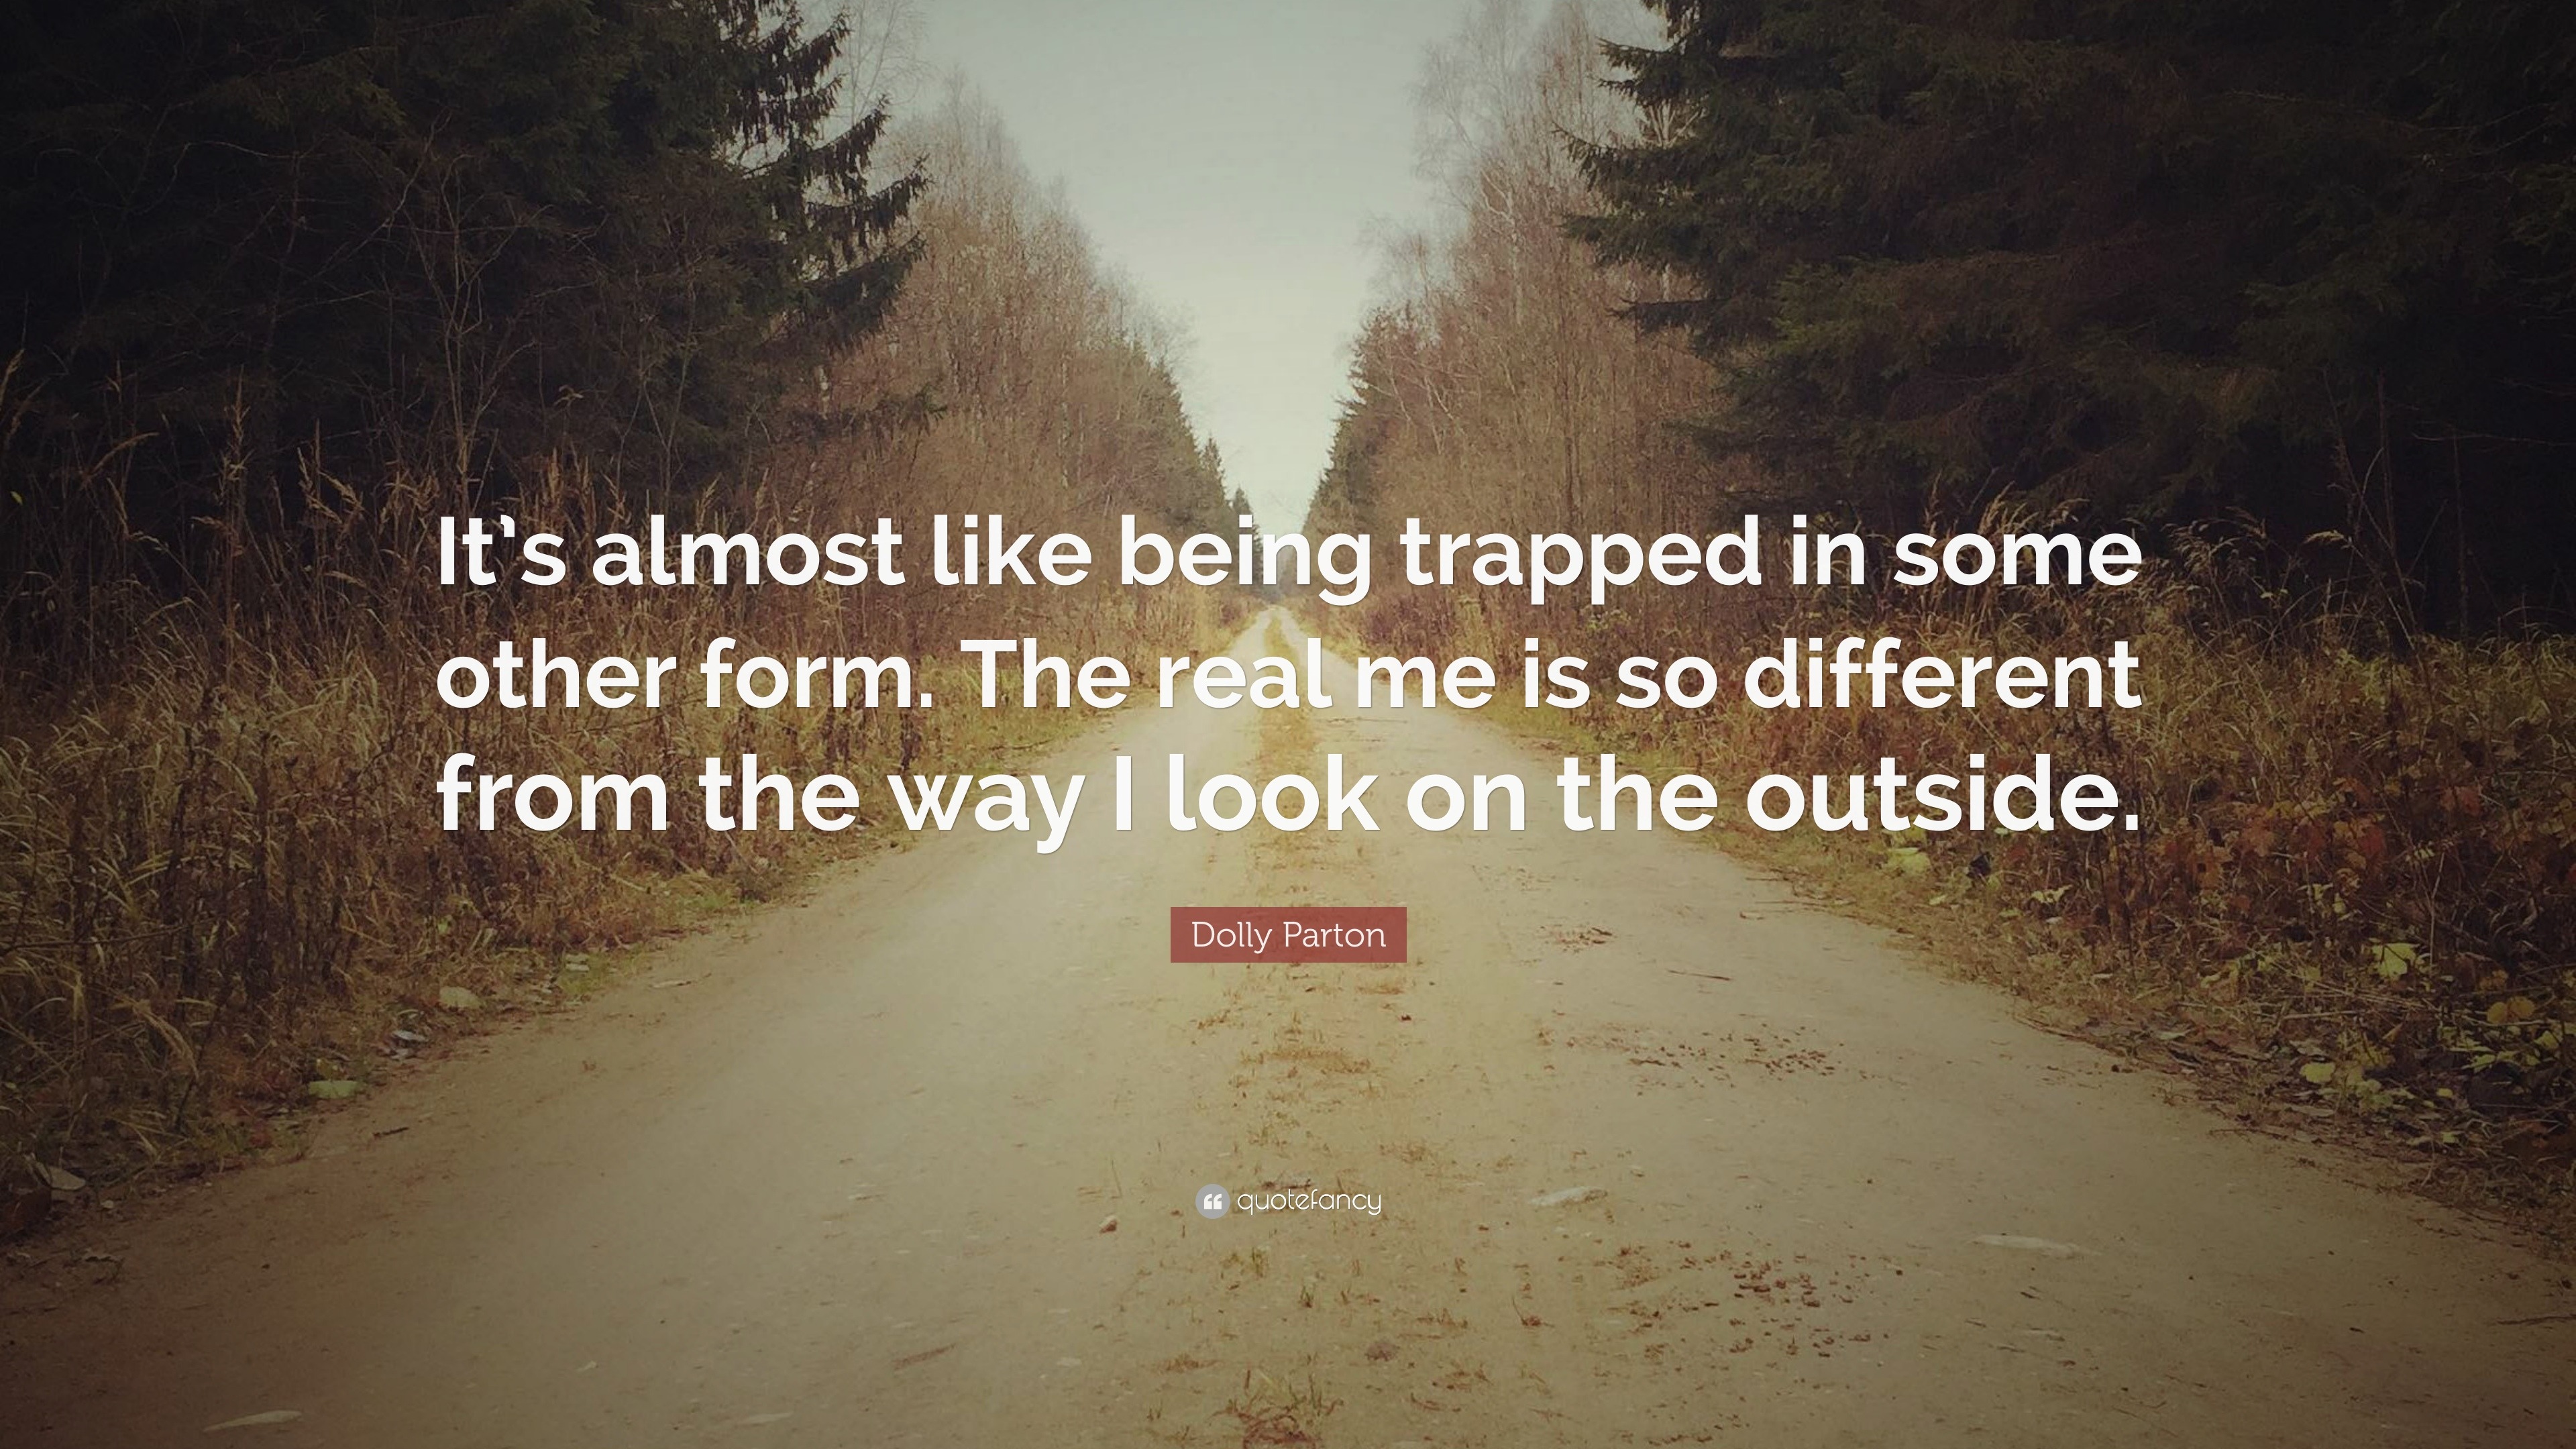 Dolly Parton Quote: “It's almost like being trapped in some other